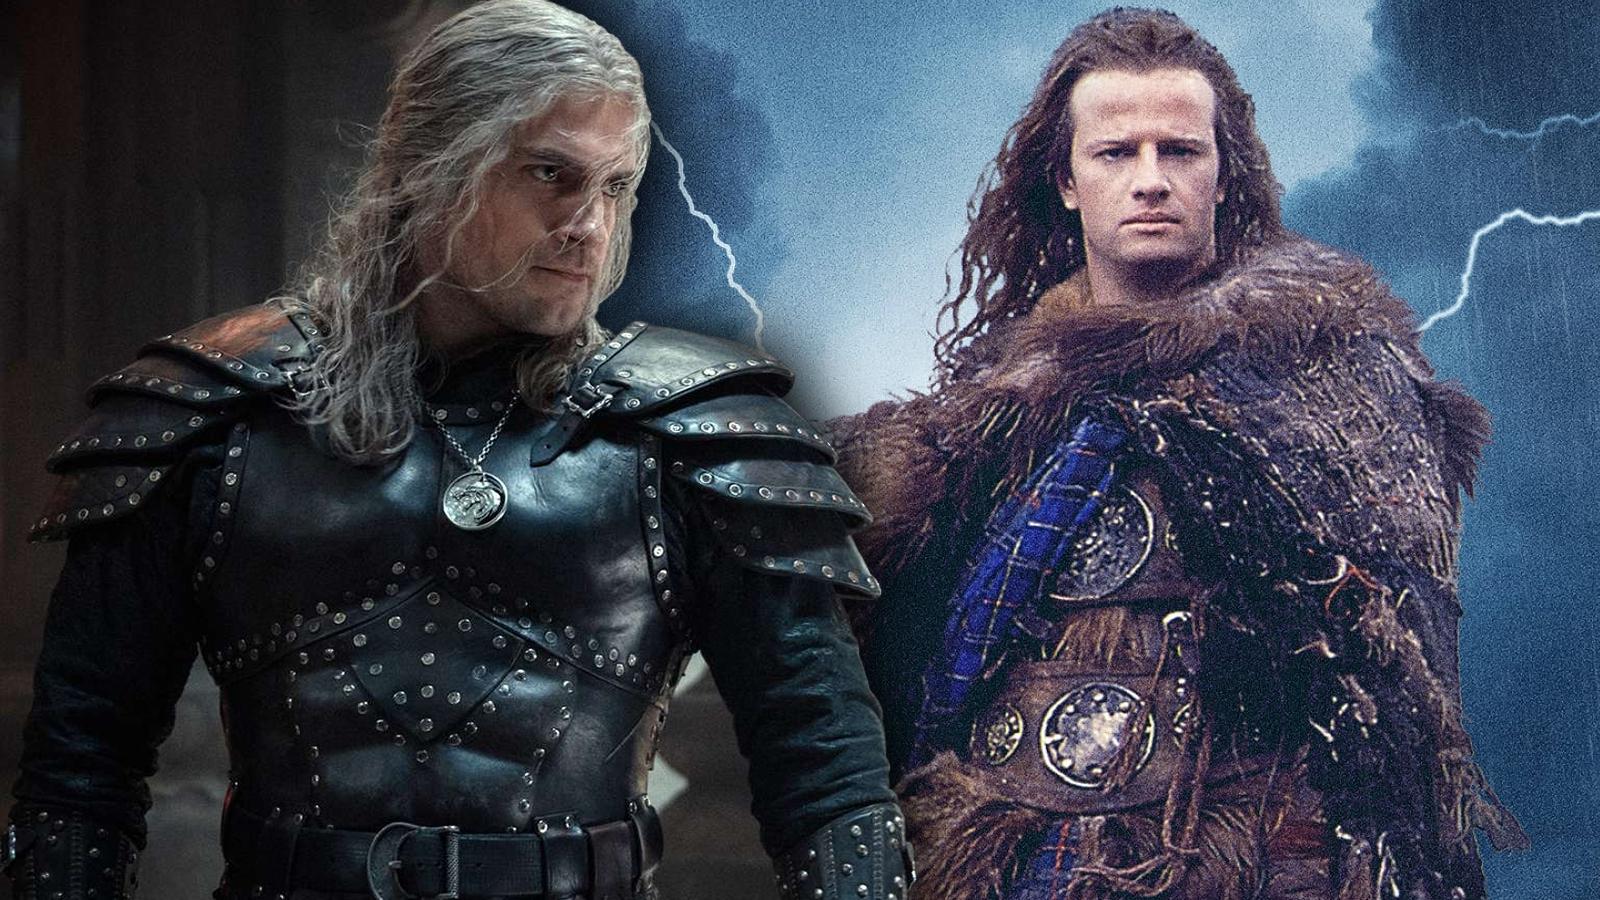 Henry Cavill in Witcher combined with the poster for Highlander